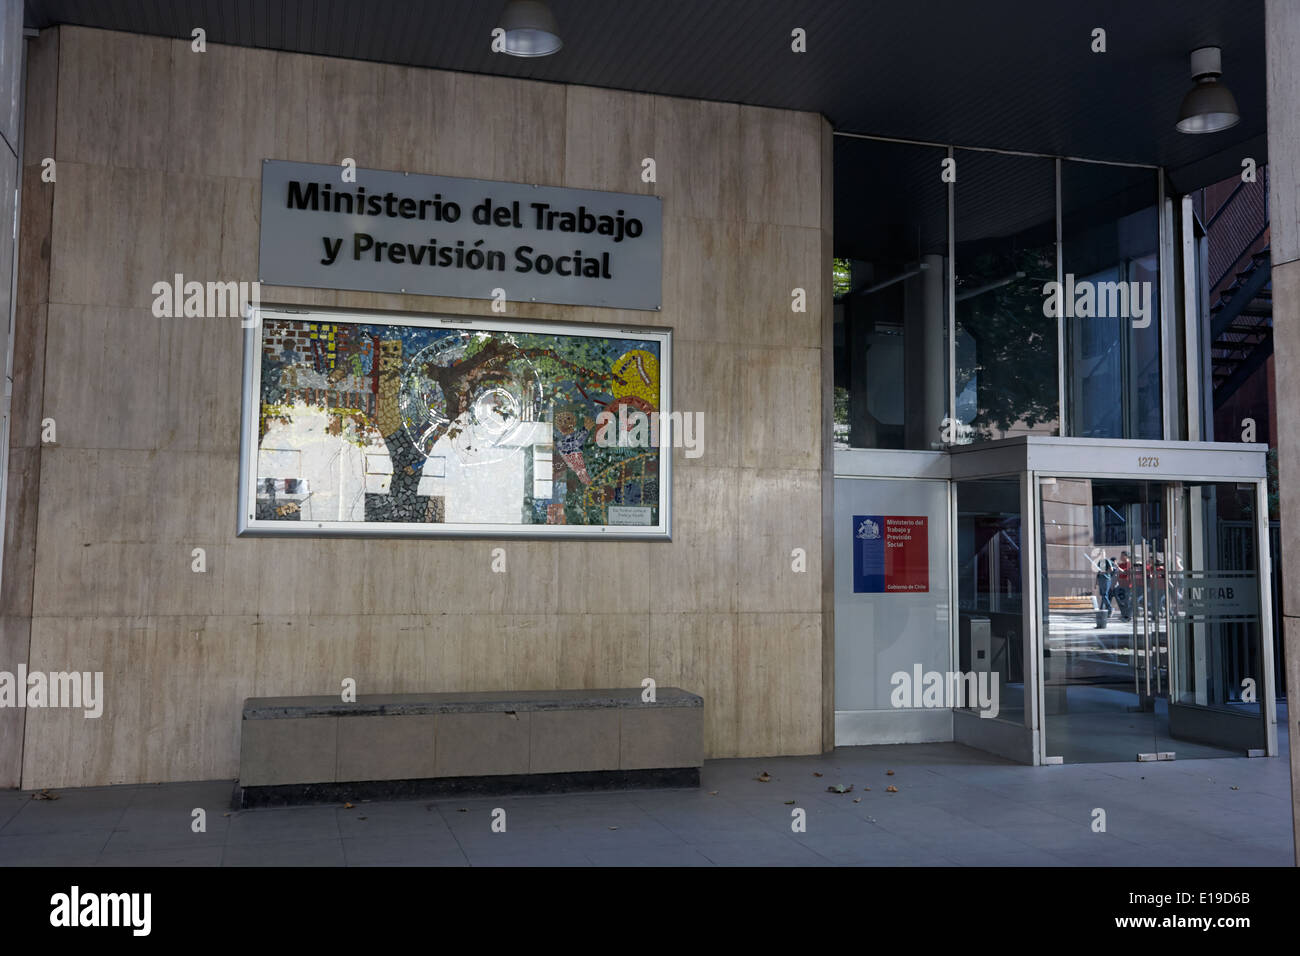 ministerio del trabajo y prevision social ministry of labour and social security Santiago Chile Stock Photo